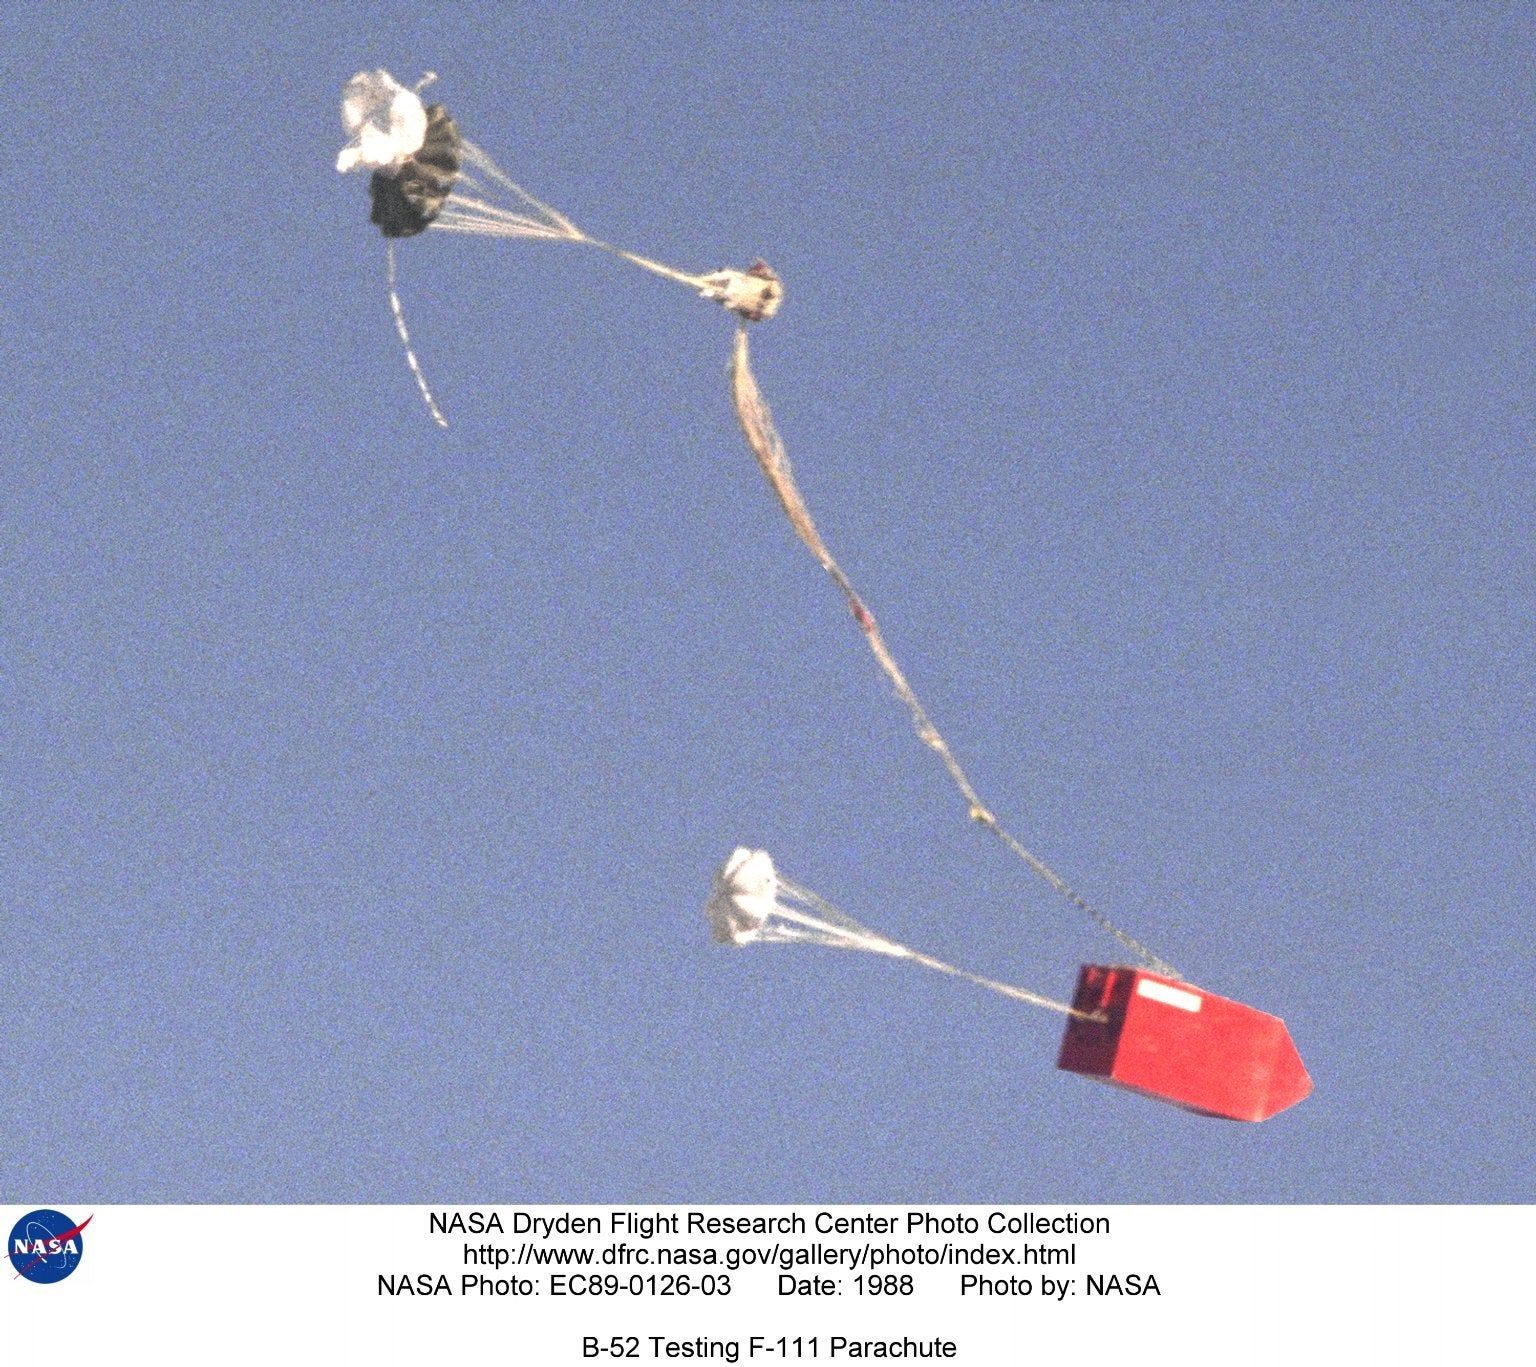 The main parachute begins to deploy on the mock-up of an F-111 "Aardvark" bomber cockpit section after being dropped from NASA's B-52 mothership during 1988 flight tests on improved parachute systems for the Air Force bomber. The F-111's ejection system separated the entire cockpit from the rest of the aircraft, and a large parachute was then deployed to lower the cockpit section to the ground. NASA B-52, Tail Number 008, is an air launch carrier aircraft, "mothership," as well as a research aircraft platform that has been used on a variety of research projects. The aircraft, a "B" model built in 1952 and first flown on June 11, 1955, is the oldest B-52 in flying status and has been used on some of the most significant research projects in aerospace history. Some of the significant projects supported by B-52 008 include the X-15, the lifting bodies, HiMAT (highly maneuverable aircraft technology), Pegasus, validation of parachute systems developed for the space shuttle program (solid-rocket-booster recovery system and the orbiter drag chute system), and the X-38. The B-52 served as the launch vehicle on 106 X-15 flights and flew a total of 159 captive-carry and launch missions in support of that program from June 1959 to October 1968. Information gained from the highly successful X-15 program contributed to the Mercury, Gemini, and Apollo human spaceflight programs as well as space shuttle development. Between 1966 and 1975, the B-52 served as the launch aircraft for 127 of the 144 wingless lifting body flights. In the 1970s and 1980s, the B-52 was the launch aircraft for several aircraft at what is now the Dryden Flight Research Center, Edwards, California, to study spin-stall, high-angle-of attack, and maneuvering characteristics. These included the 3/8-scale F-15/spin research vehicle (SRV), the HiMAT (Highly Maneuverable Aircraft Technology) research vehicle, and the DAST (drones for aerodynamic and structural testing). The aircraft supported the development of parachute recovery systems used to recover the space shuttle solid rocket booster casings. It also supported eight orbiter (space shuttle) drag chute tests in 1990. In addition, the B-52 served as the air launch platform for the first six Pegasus space boosters. During its many years of service, the B-52 has undergone several modifications. The first major modification was made by North American Aviation (now part of Boeing) in support of the X-15 program. This involved creating a launch-panel-operator station for monitoring the status of the test vehicle being carried, cutting a large notch in the right inboard wing flap to accommodate the vertical tail of the X-15 aircraft, and installing a wing pylon that enables the B-52 to carry research vehicles and test articles to be air-launched/dropped. Located on the right wing, between the inboard engine pylon and the fuselage, this wing pylon was subjected to extensive testing prior to its use. For each test vehicle the B-52 carried, minor changes were made to the launch-panel operator's station. Built originally by the Boeing Company, the NASA B-52 is powered by eight Pratt &amp; Whitney J57-19 turbojet engines, each of which produce 12,000 pounds of thrust. The aircraft's normal launch speed has been Mach 0.8 (about 530 miles per hour) and its normal drop altitude has been 40,000 to 45,000 feet. It is 156 feet long and has a wing span of 185 feet. The heaviest load it has carried was the No. 2 X-15 aircraft at 53,100 pounds. Project manager for the aircraft is Roy Bryant.

NASA Identifier: NIX-EC89-0126-03